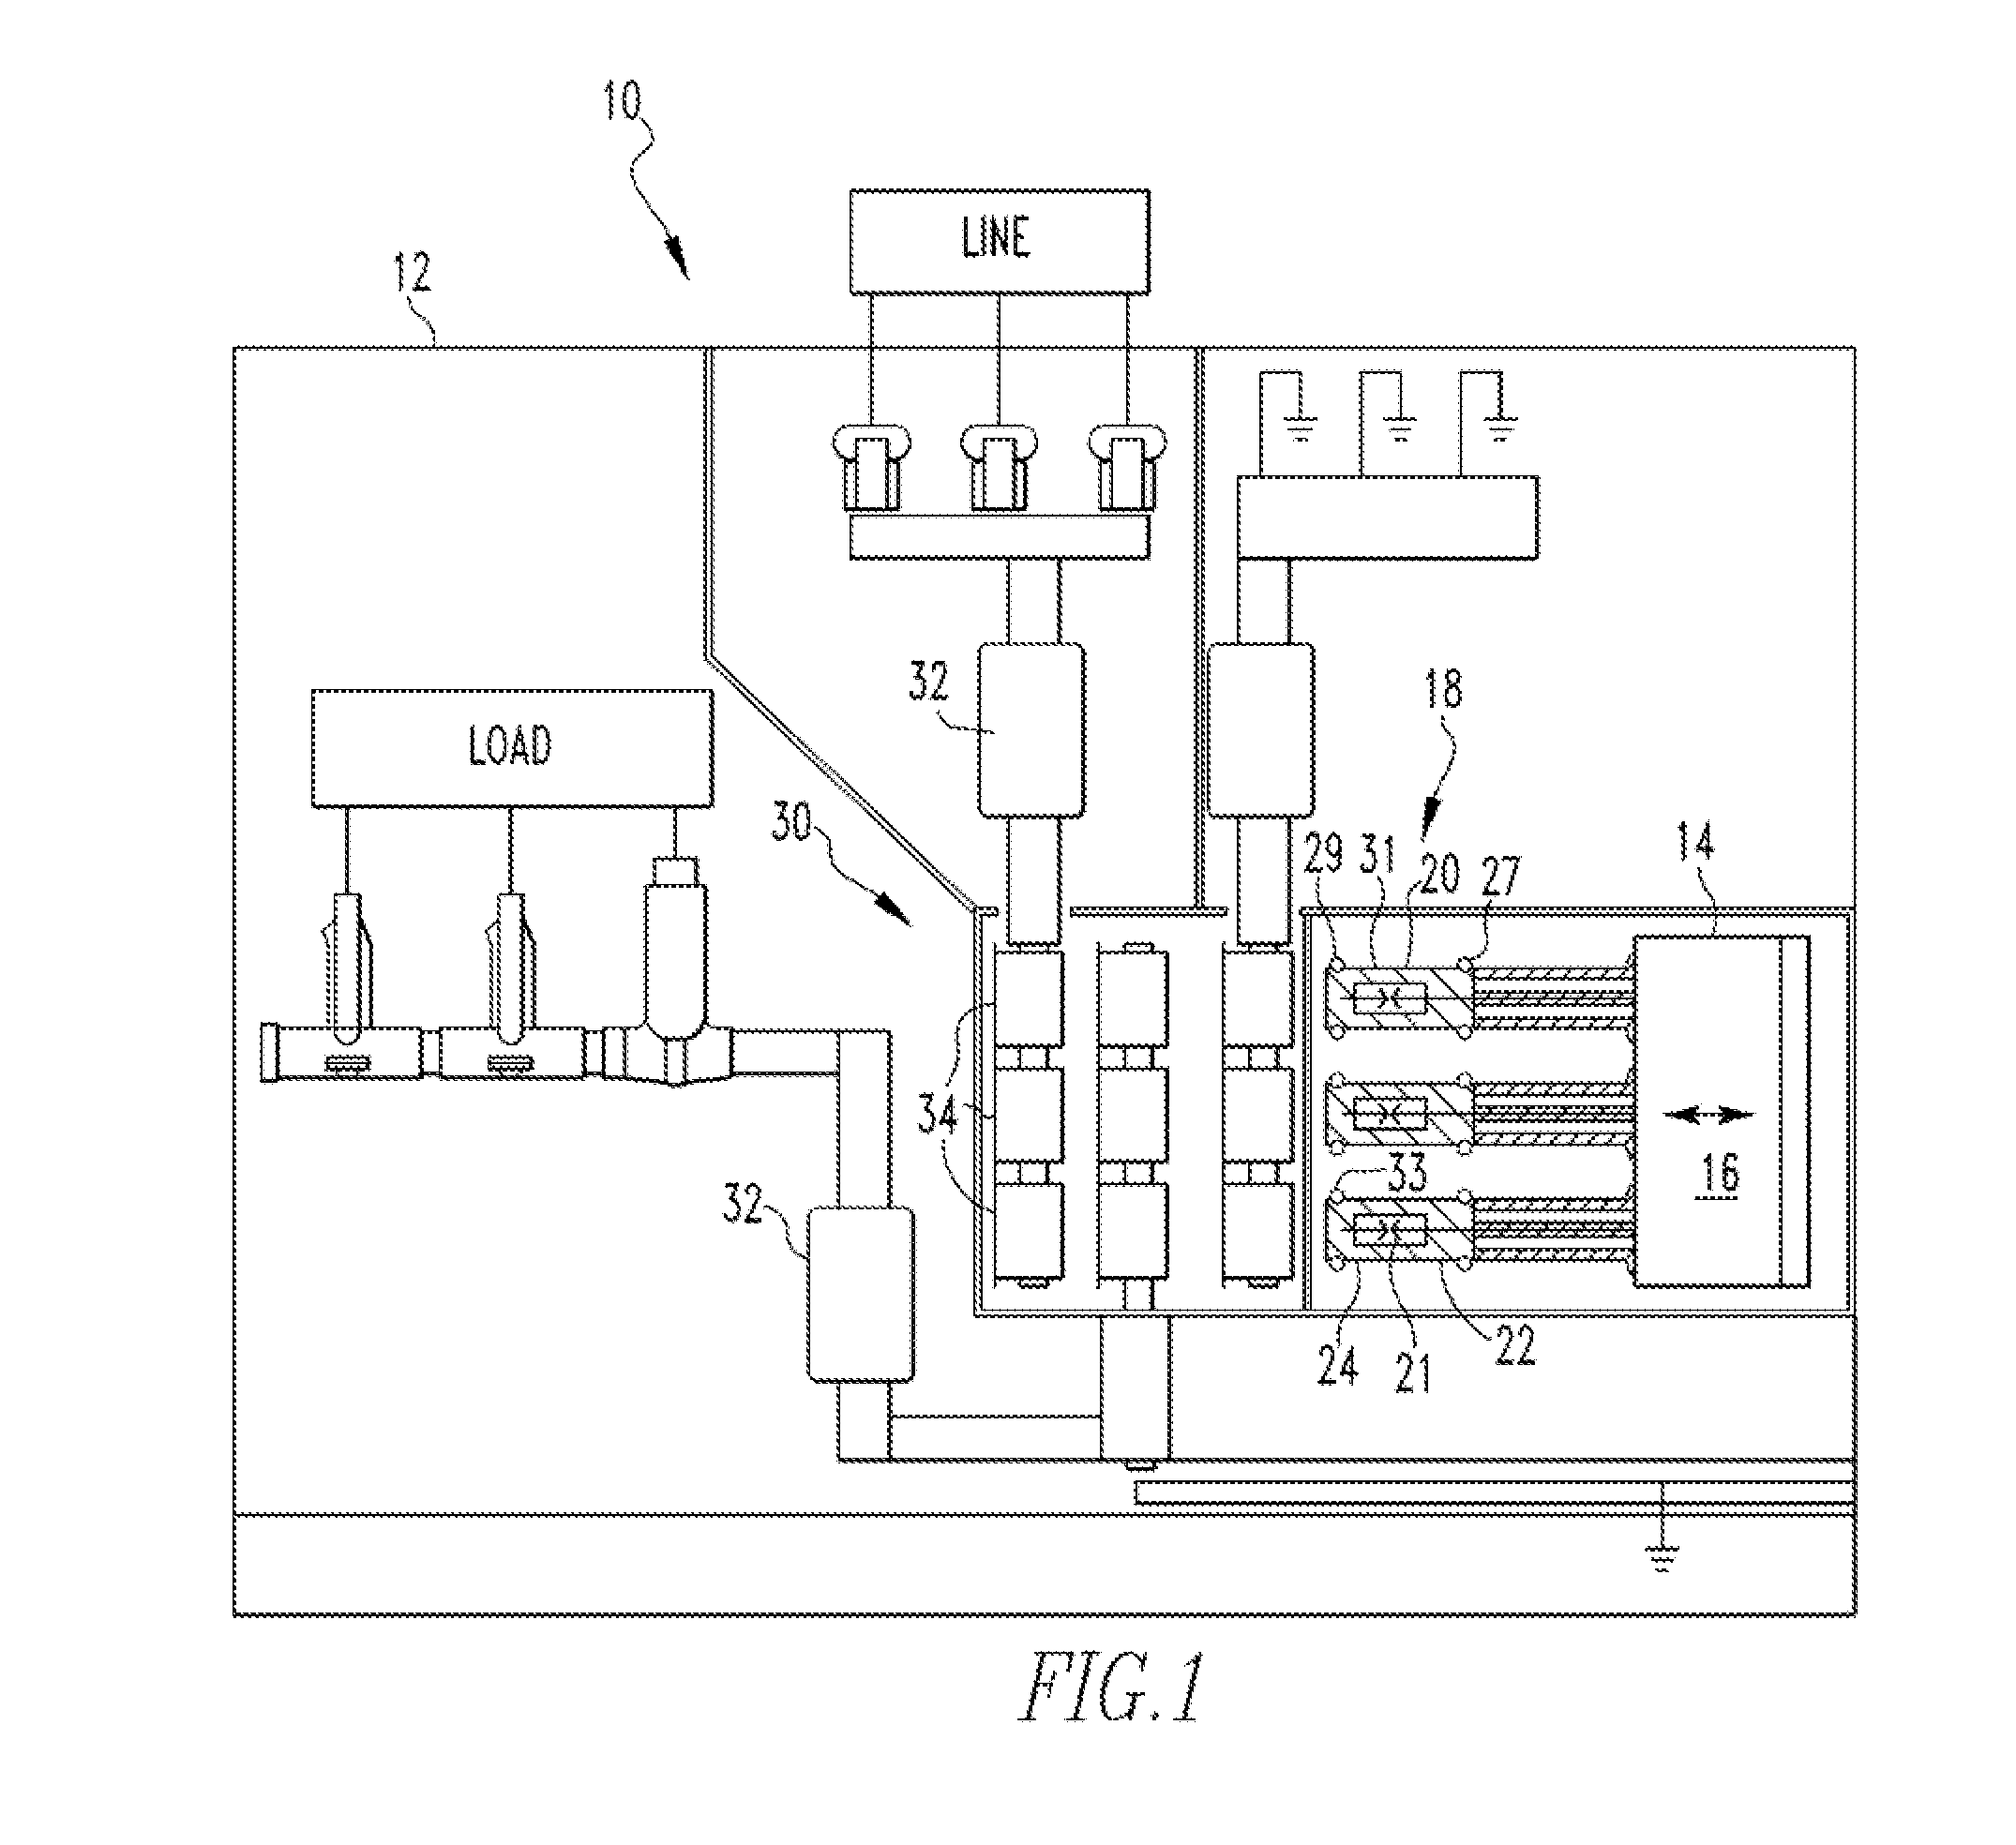 Floating contact assembly for switchgear